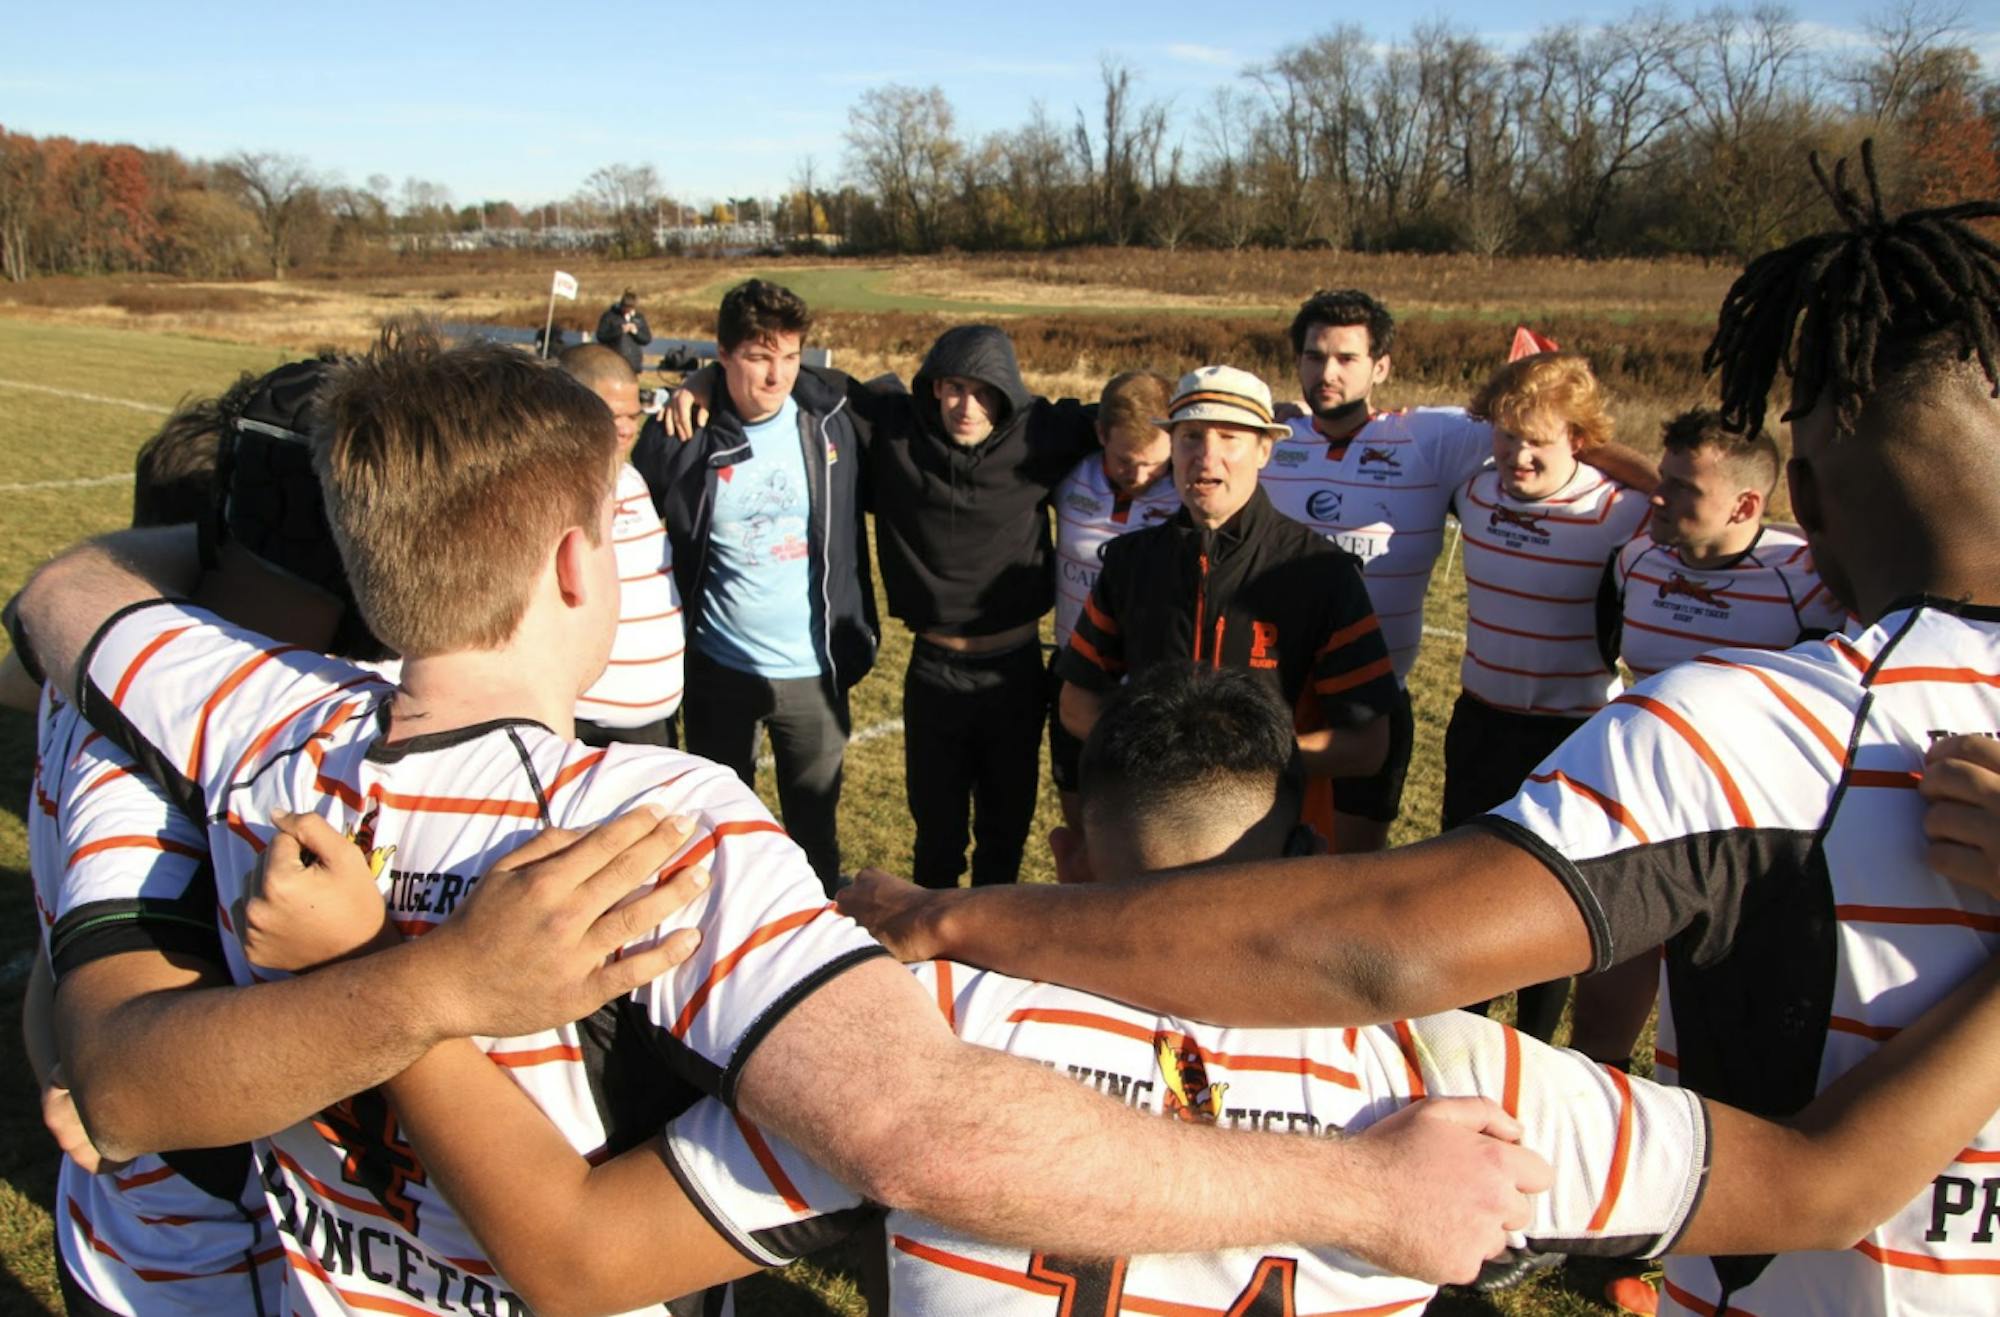 Alumni and current men’s rugby players huddle around Richard Lopacki, head coach of Princeton men’s rugby team from 2000 to 2023.